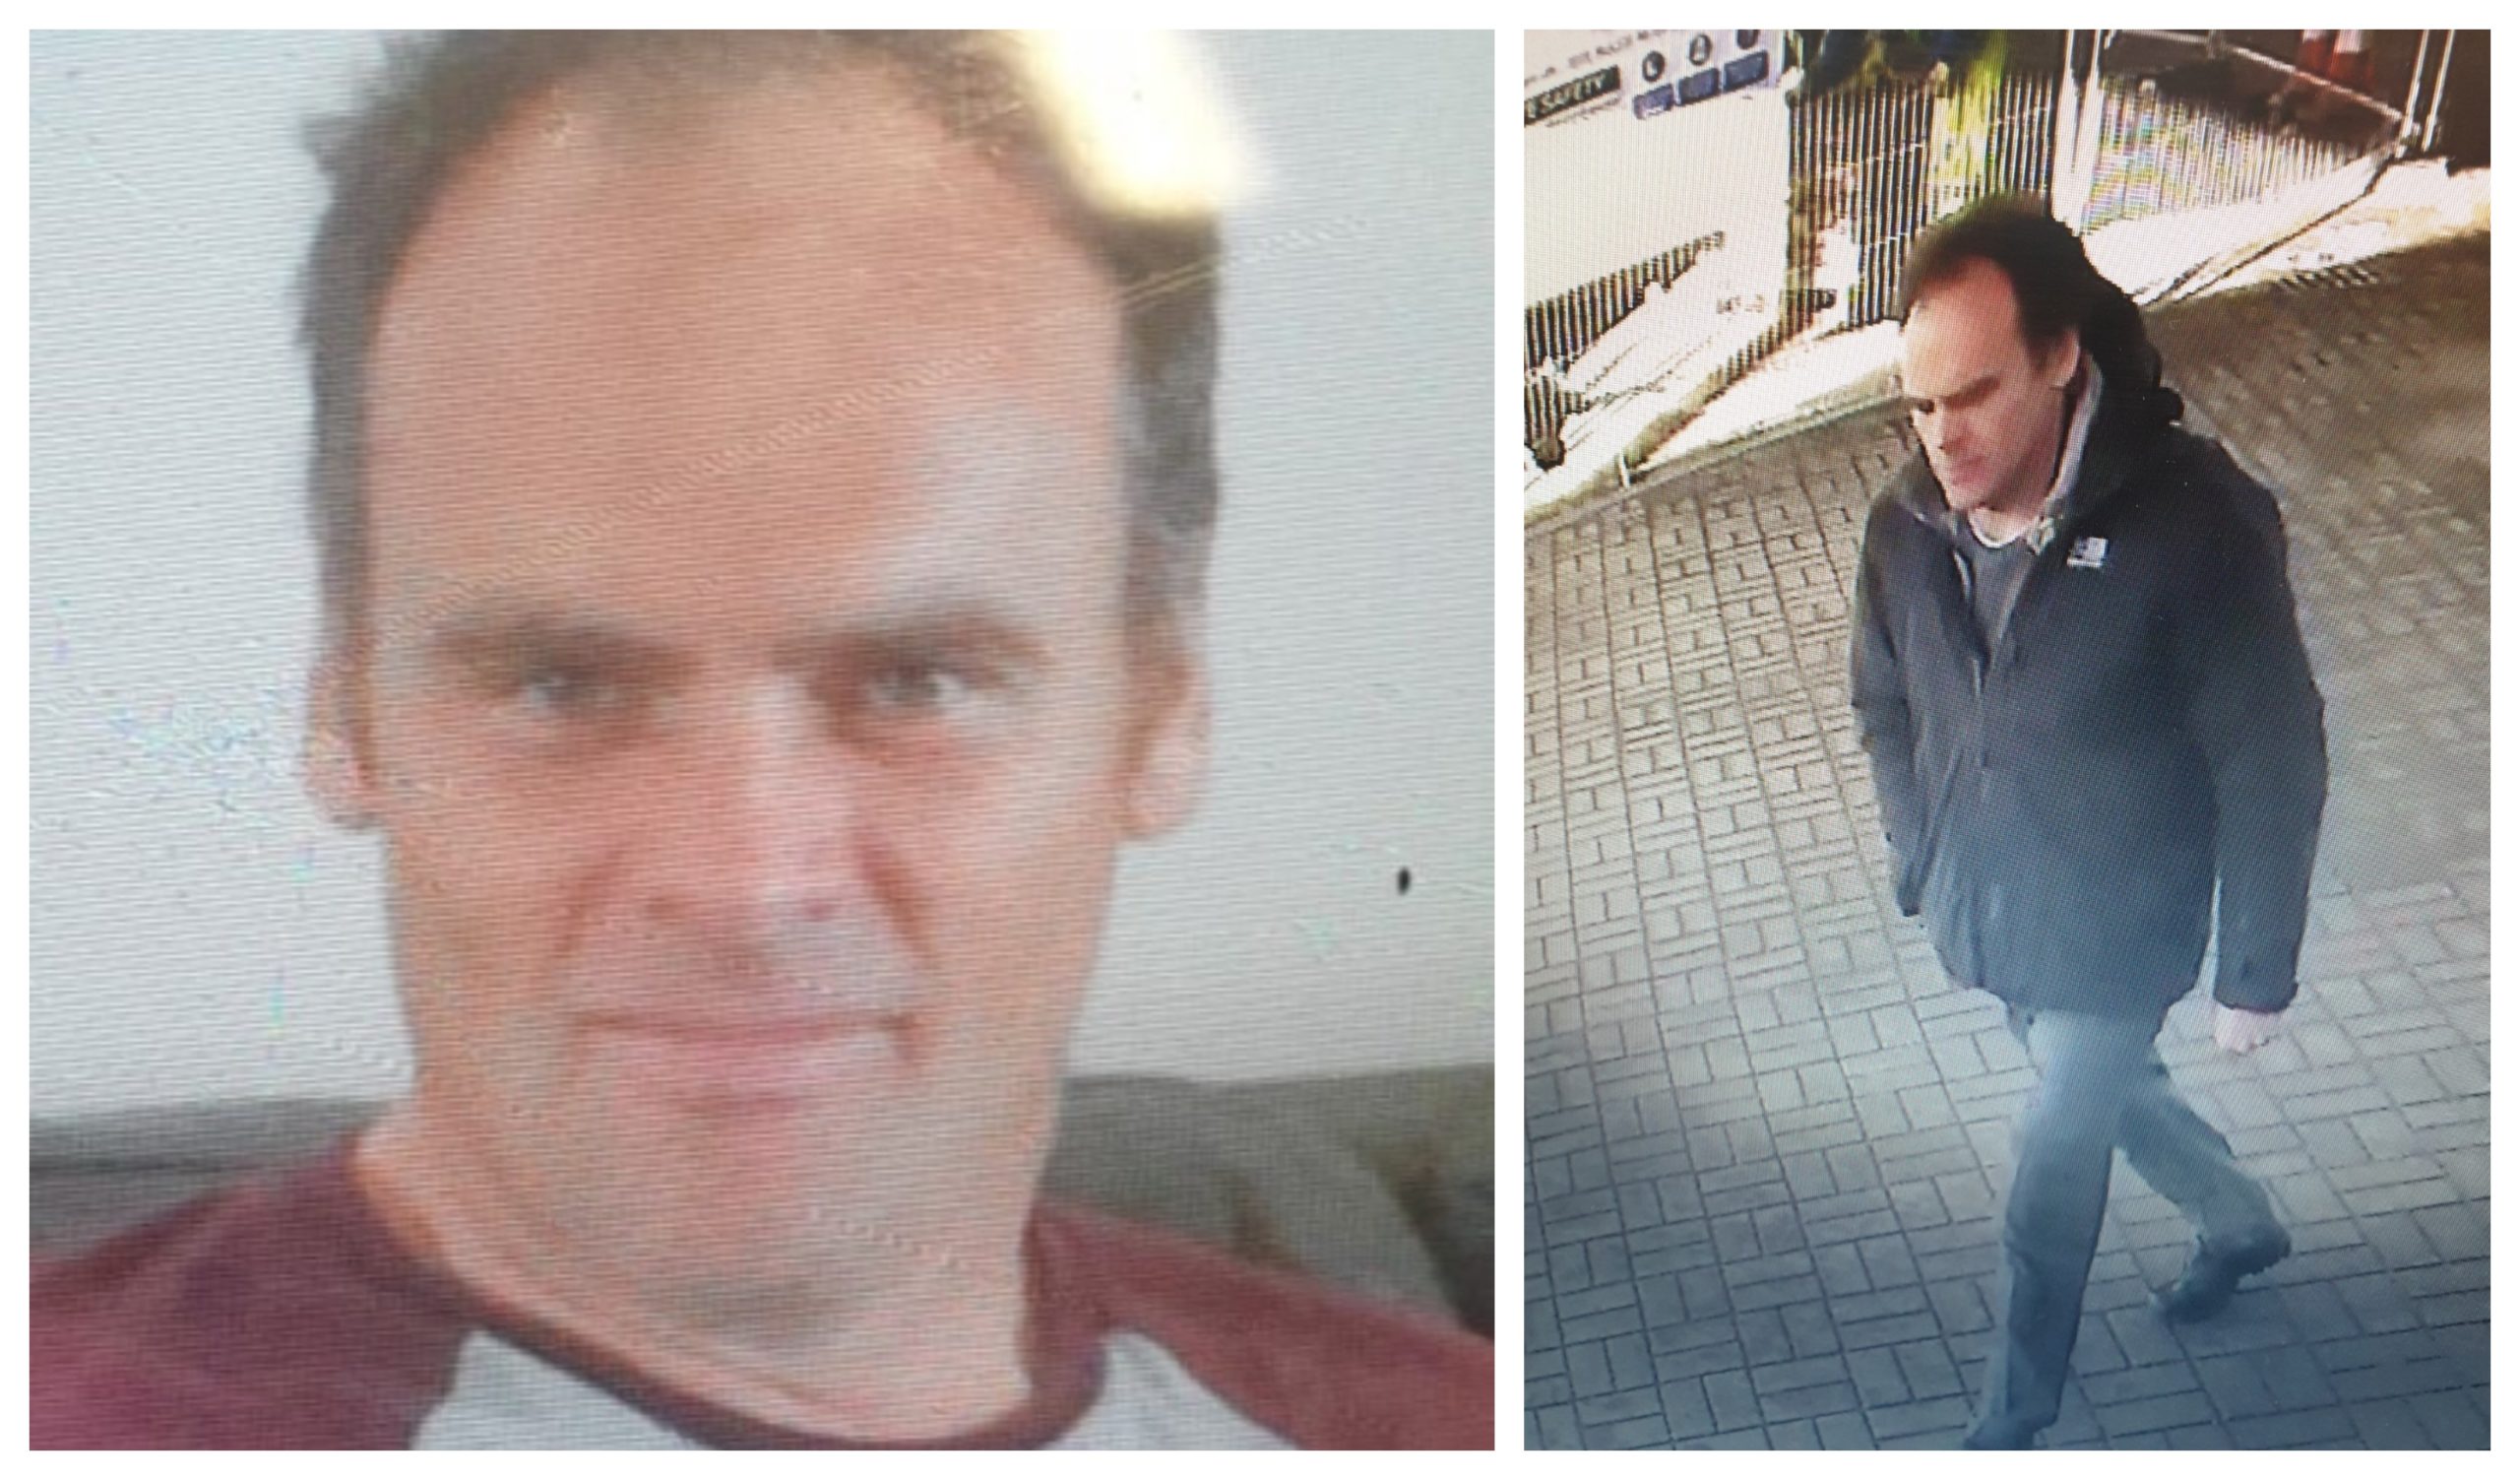 John Loughrie, 51, has been reported missing from the Findochty area on the Moray coast.